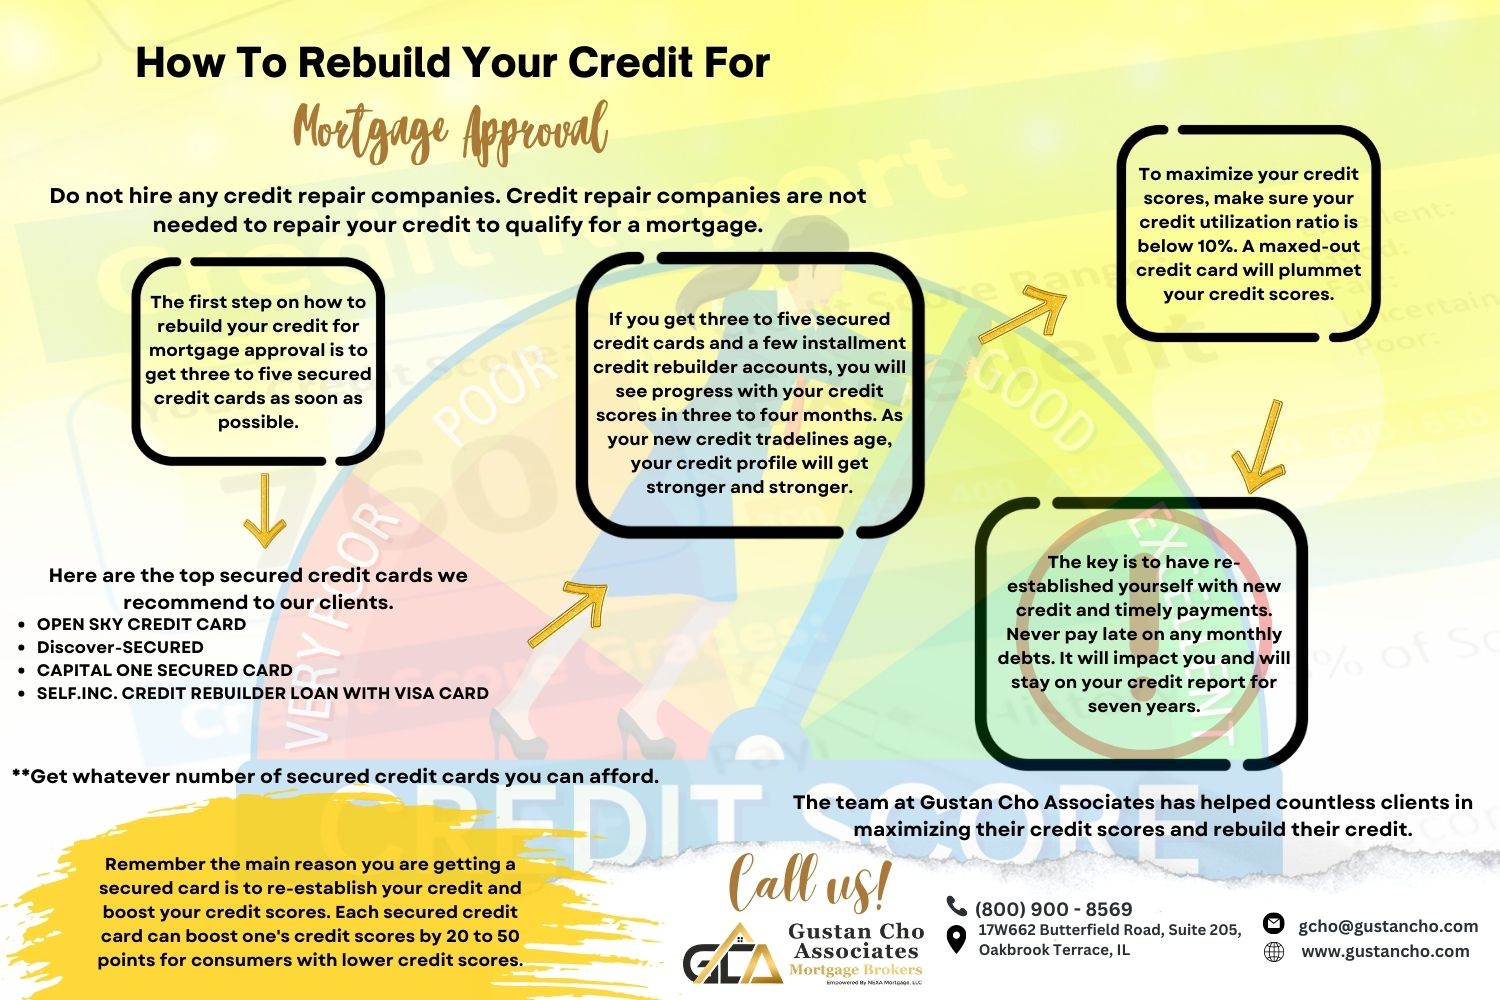 How to Rebuild your Credit